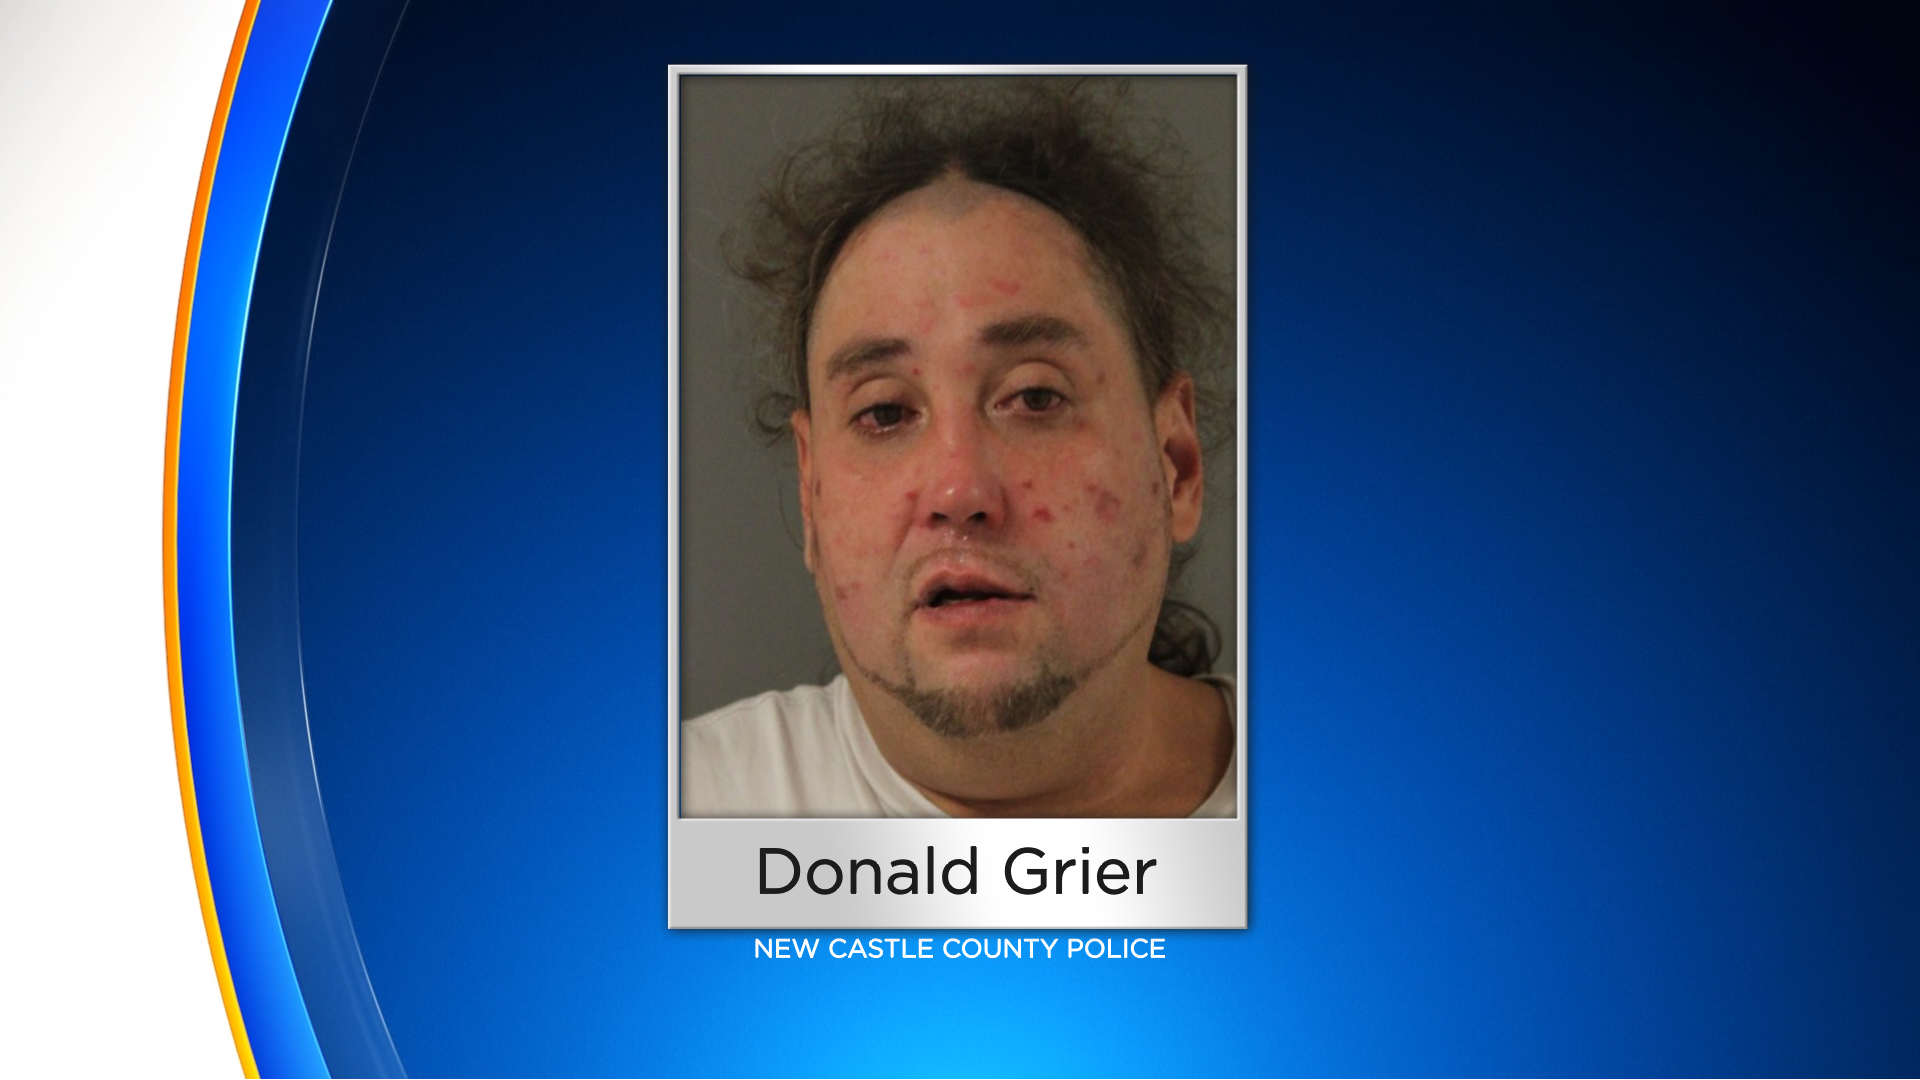 Donald Grier, Arrested, Charged With First-Degree Murder In Connection To Triple Homicide In Townsend, New Castle County, Police Say